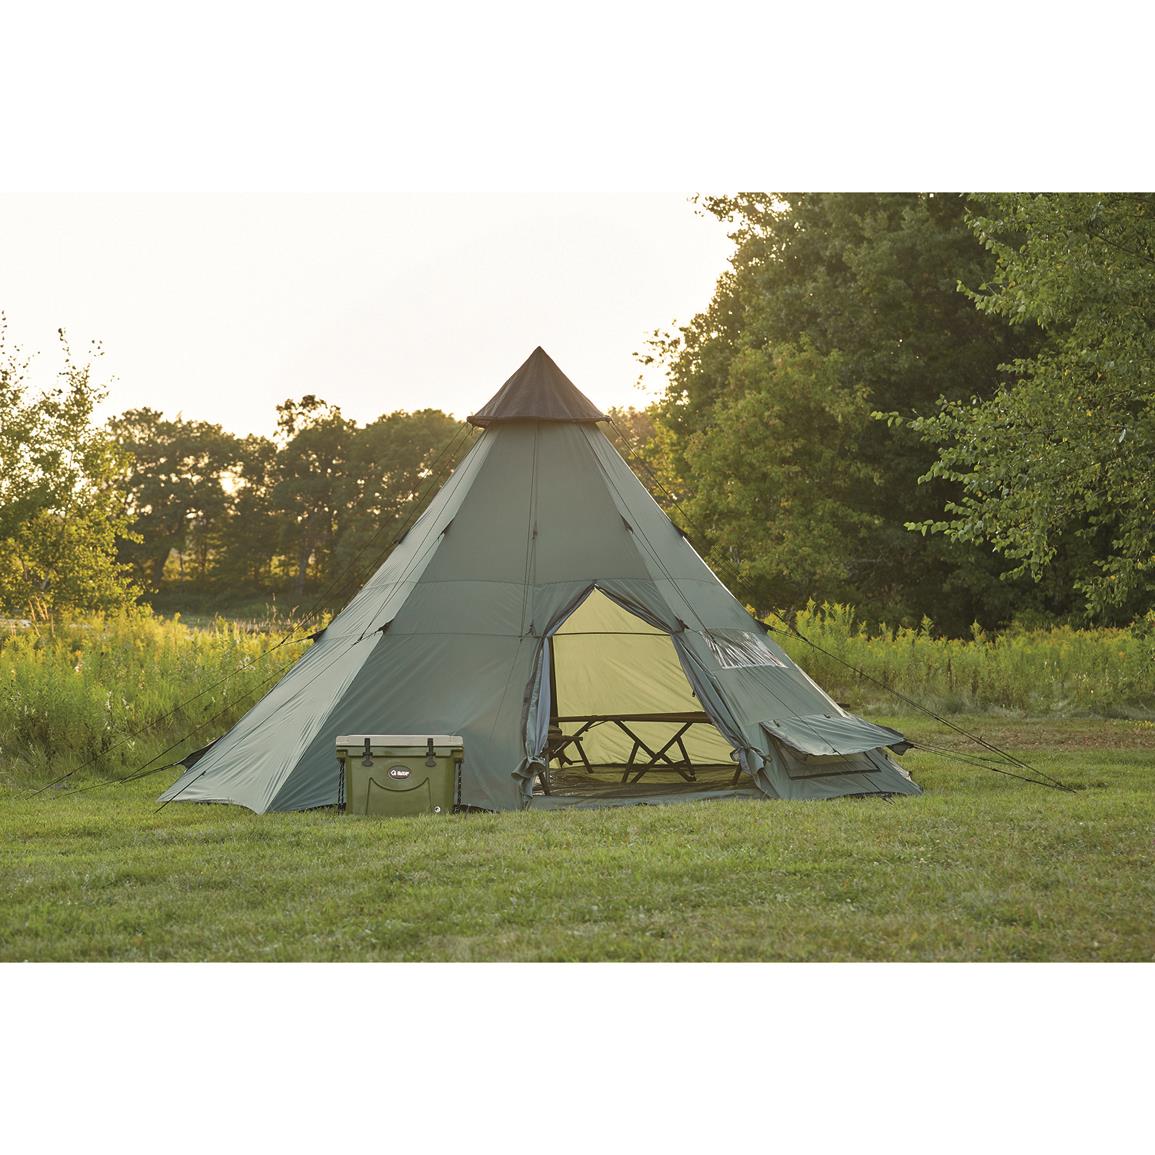 Guide Gear Teepee Tent 18 X 18 175419 Outfitter Canvas Tents At Sportsman S Guide